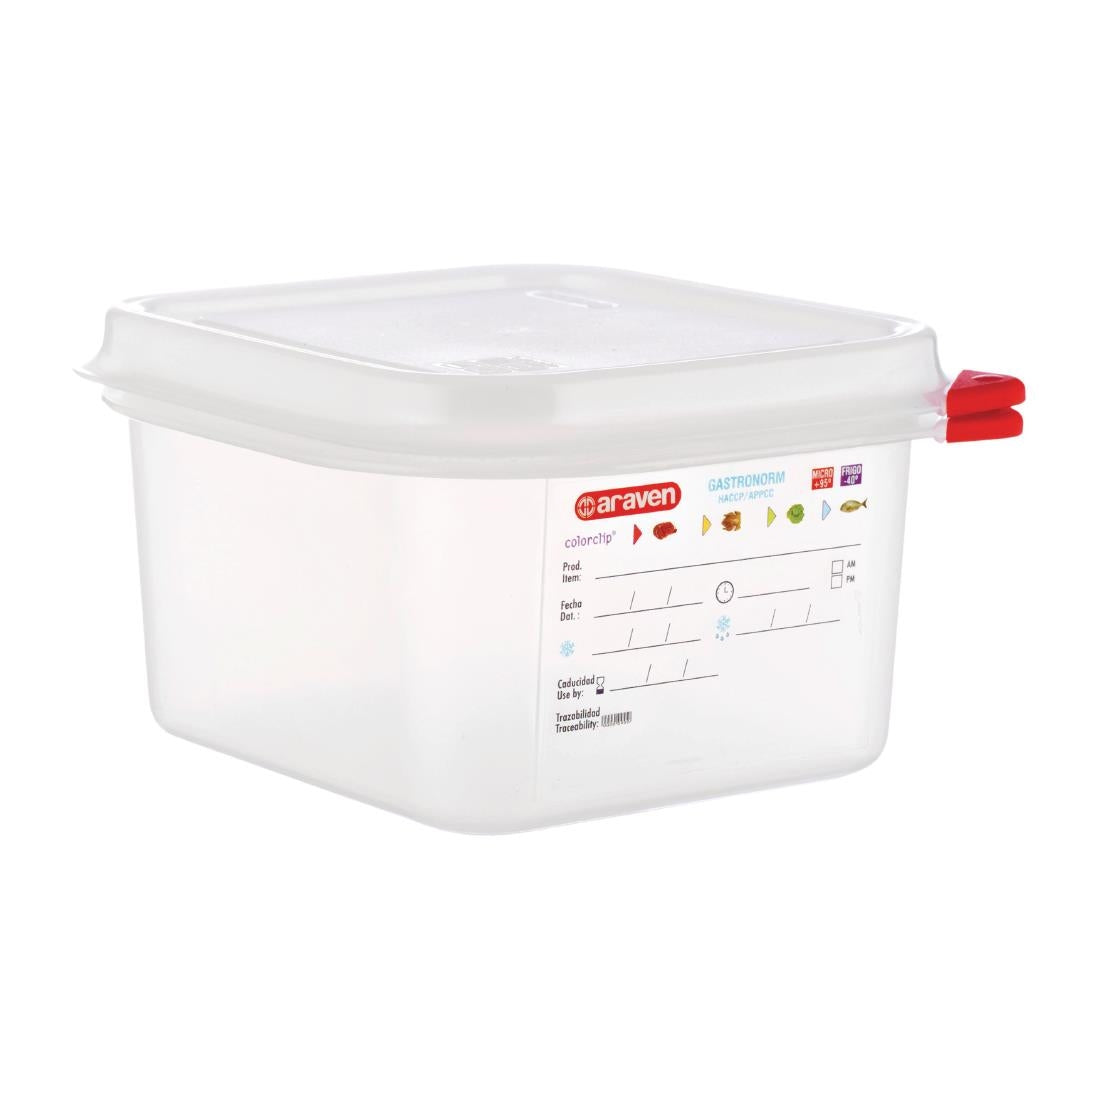 DL980 Araven Polypropylene 1/6 Gastronorm Food Storage Containers 1.7Ltr (Pack of 4) JD Catering Equipment Solutions Ltd